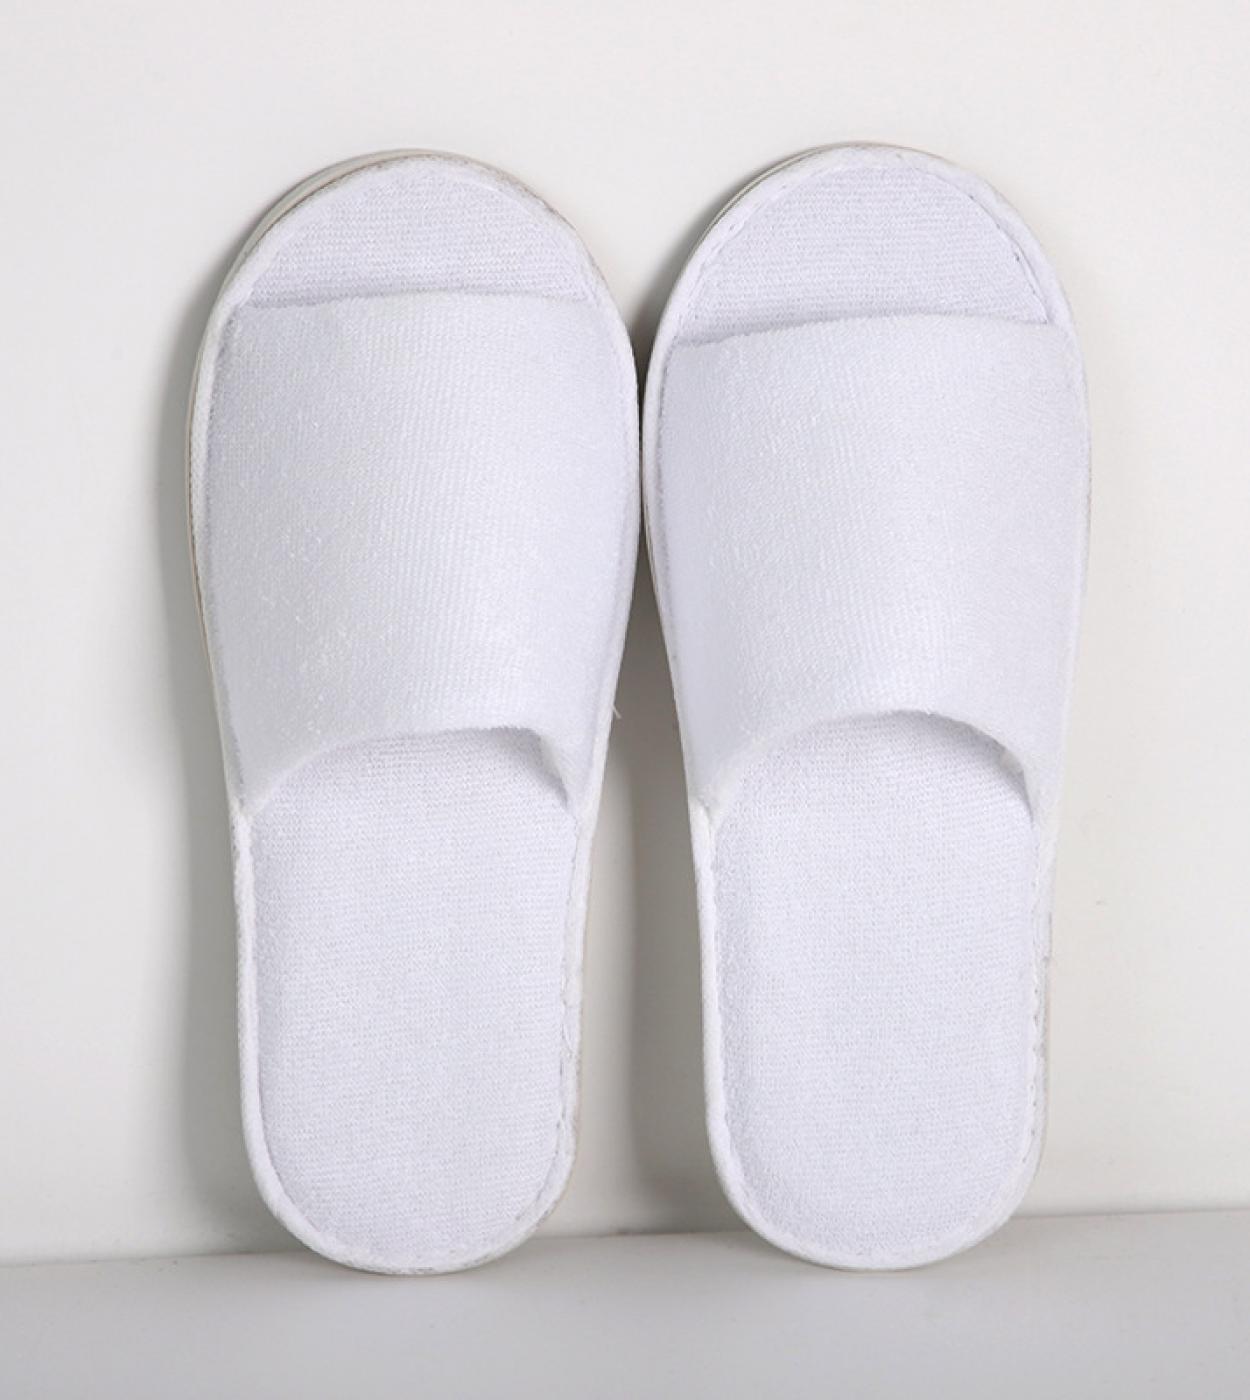 123 Pairs Disposable Slippers Hotel Travel Slipper Sanitary Party Home Guest Use Men Women Uni Closed Toe Shoes Homest